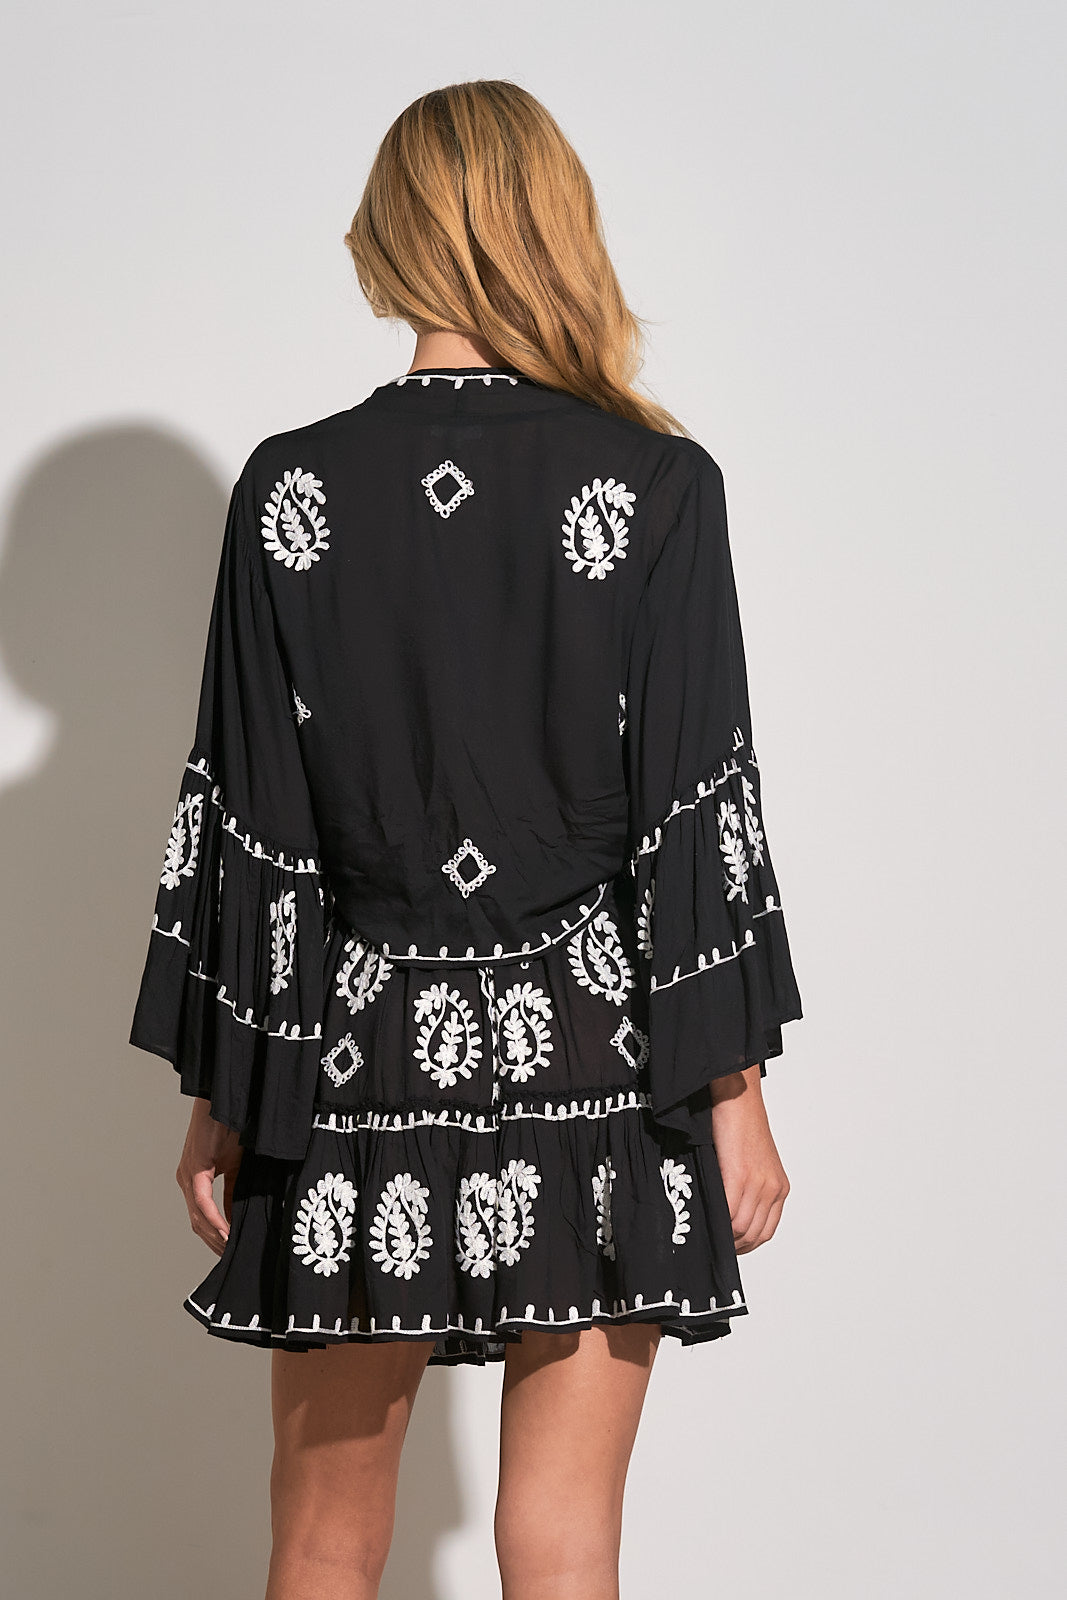 Elan Black White Embroidered Bell Sleeve Top